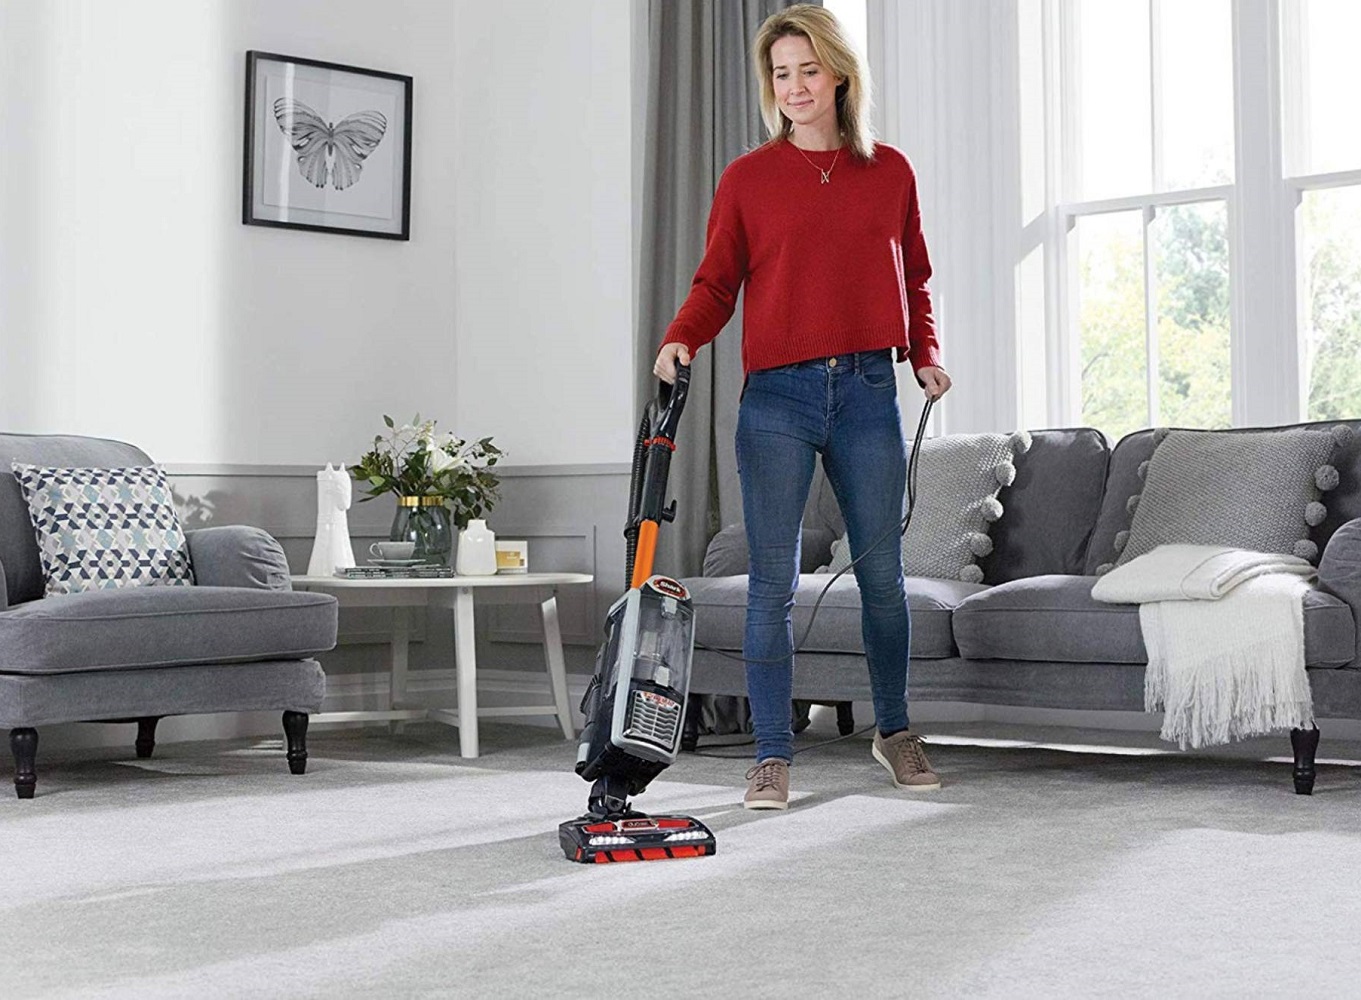 7 Best Upright Vacuum Cleaners for May 2022 | Check Reviews